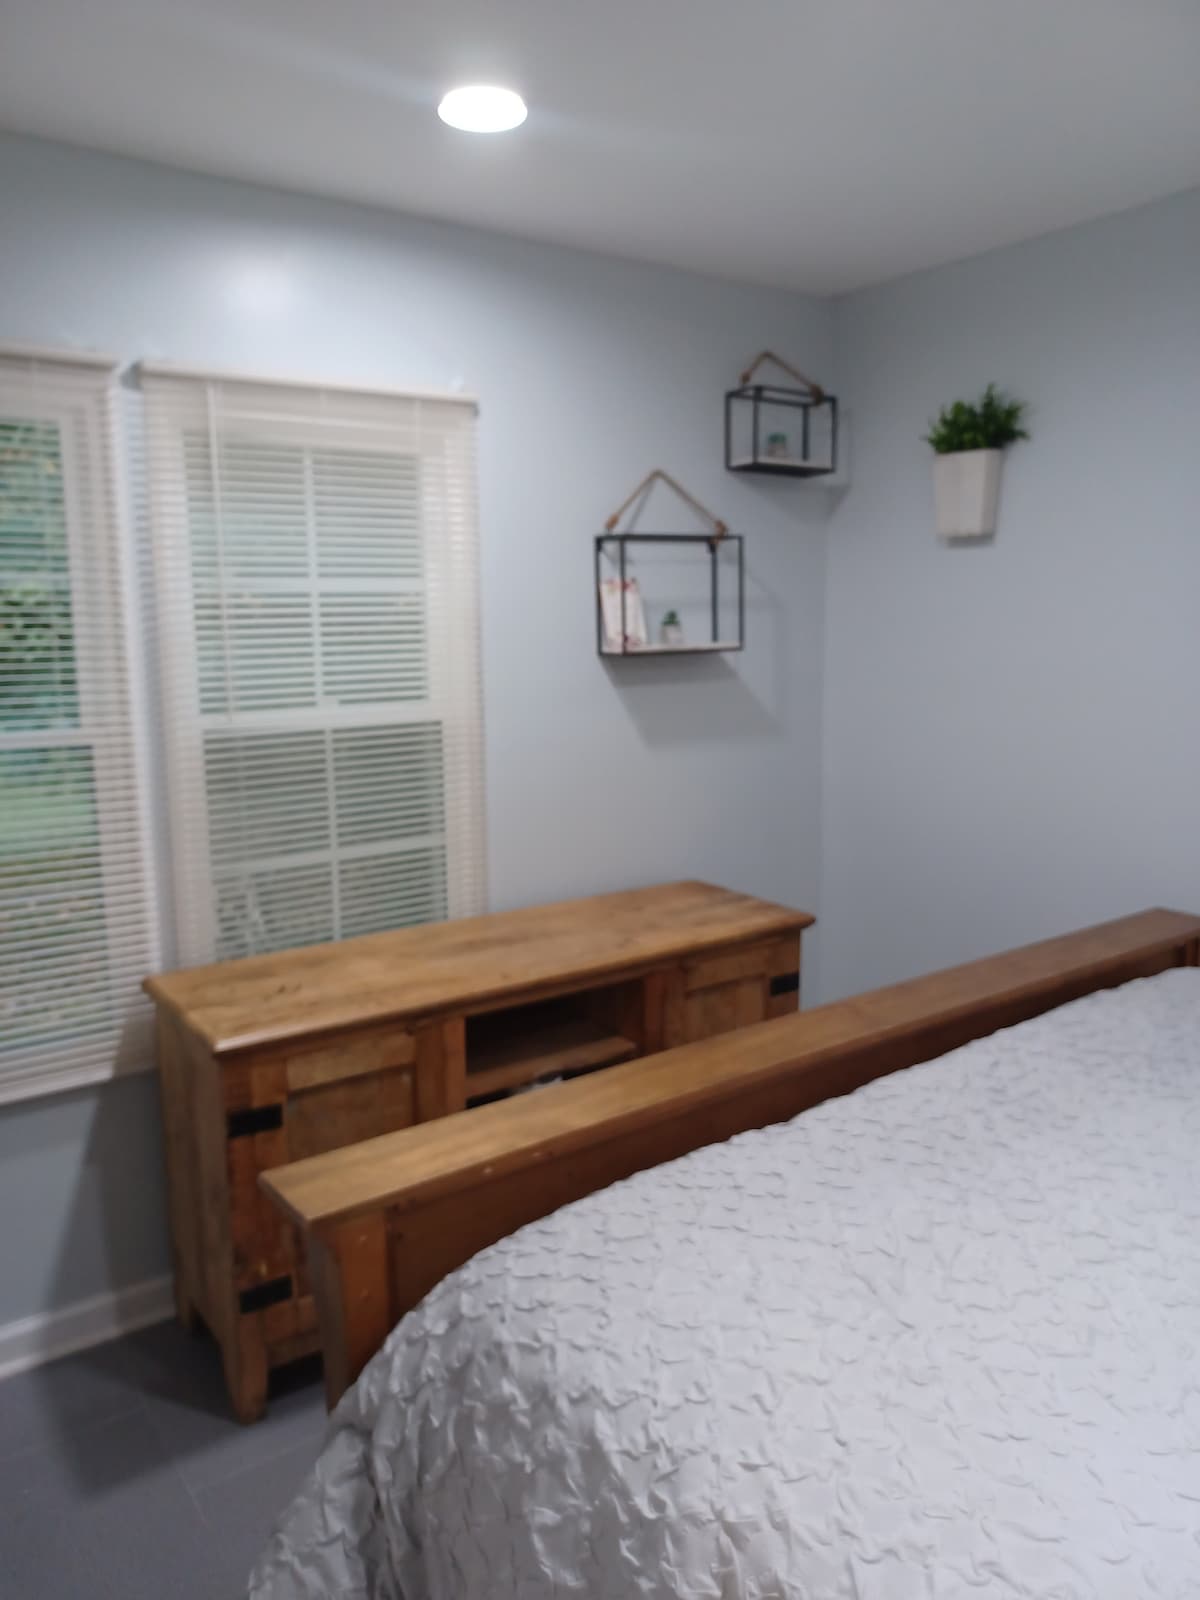 Finished basement / guest suite
7 min from Airport